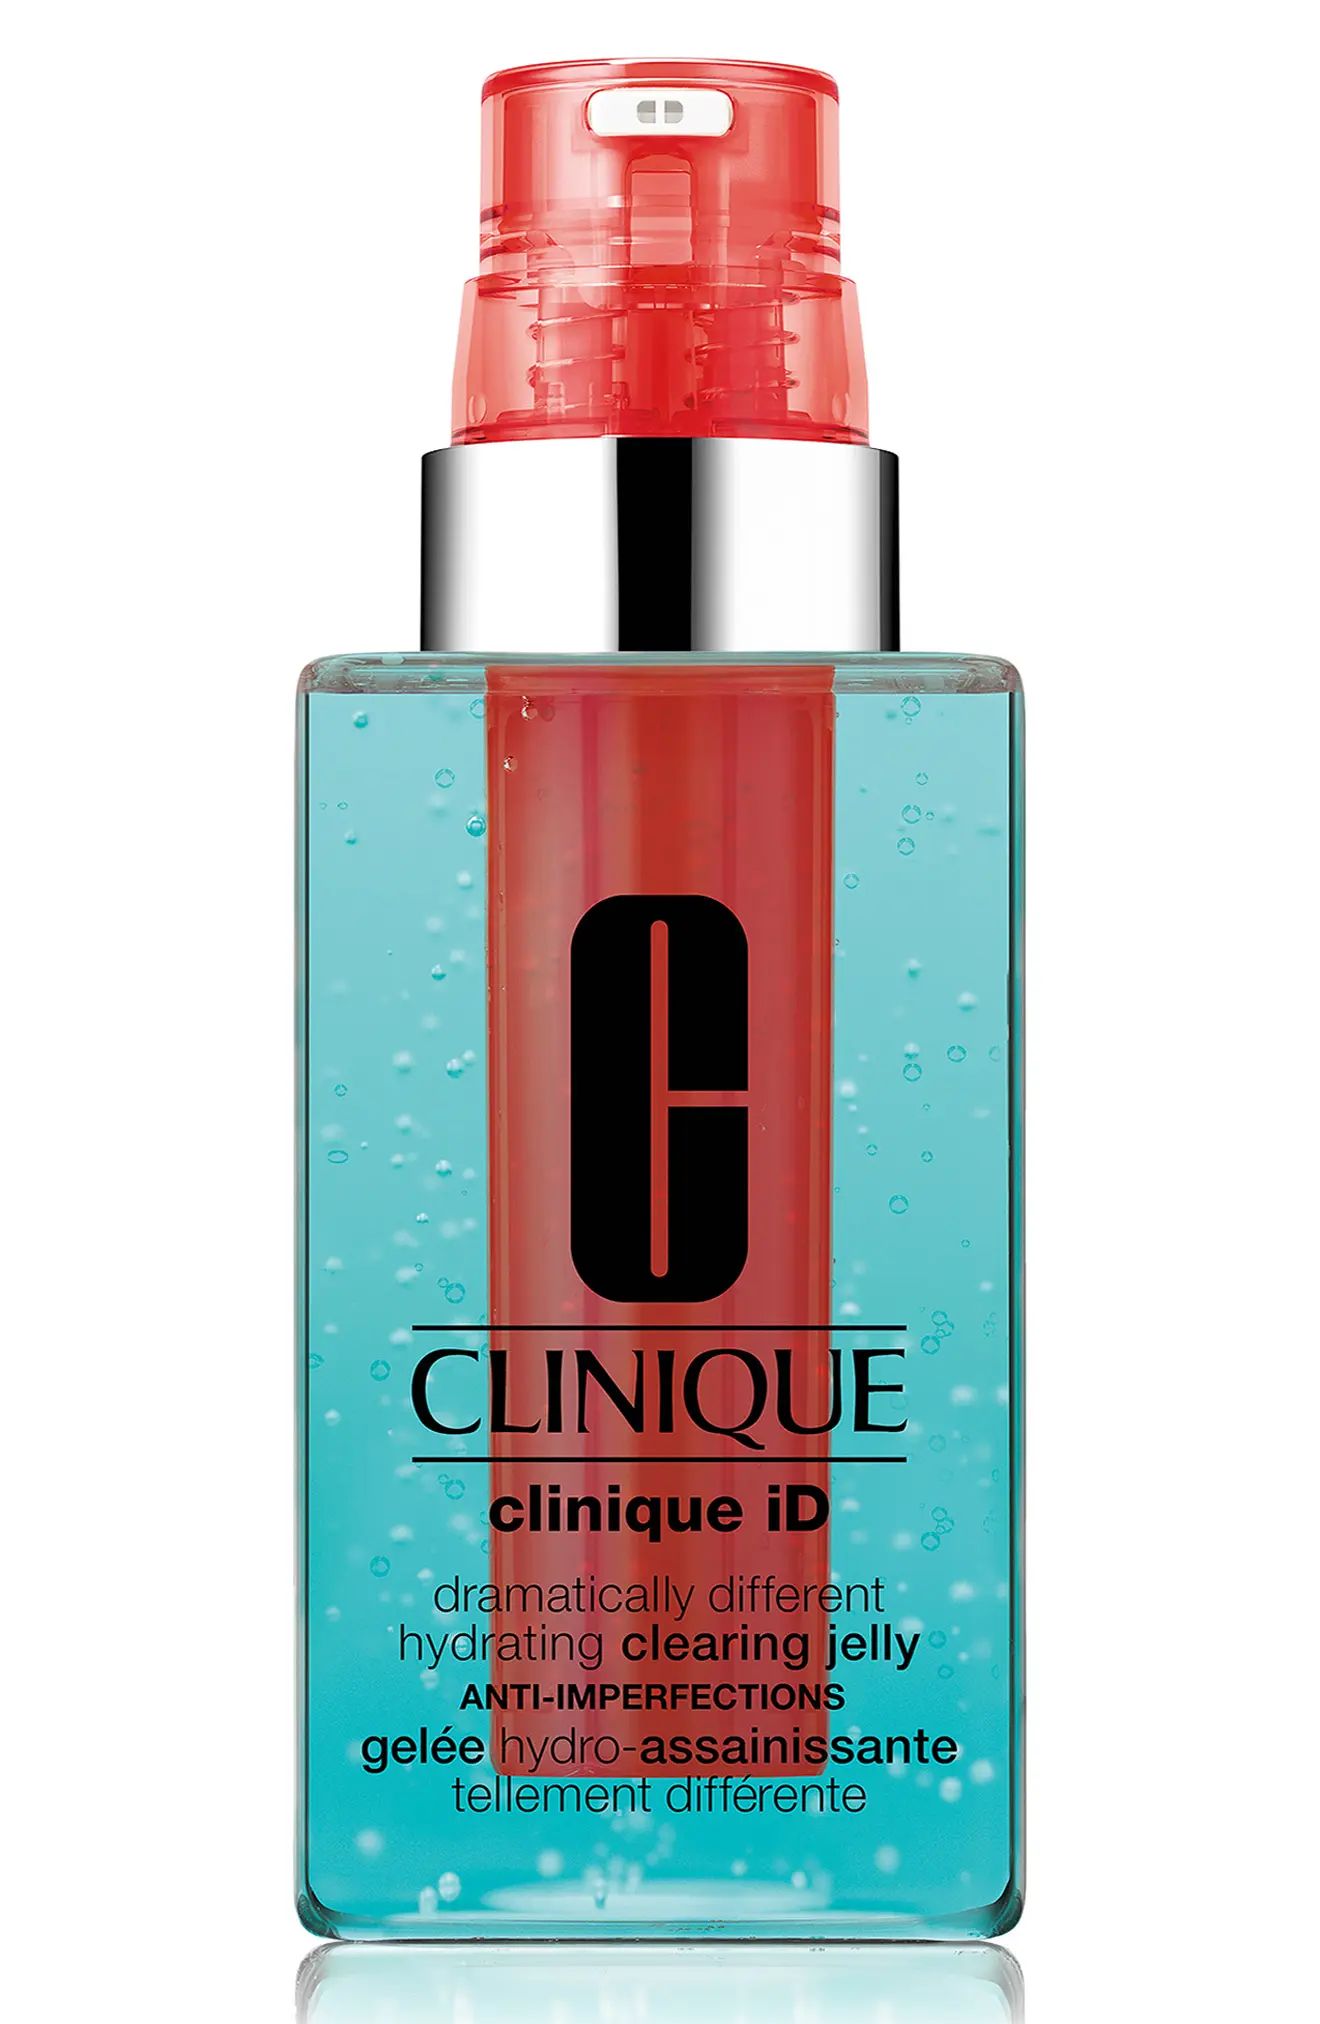 Clinique Clinique Id(TM): Dramatically Different Hydrating Clearing Jelly + Active Cartridge Concent | Nordstrom